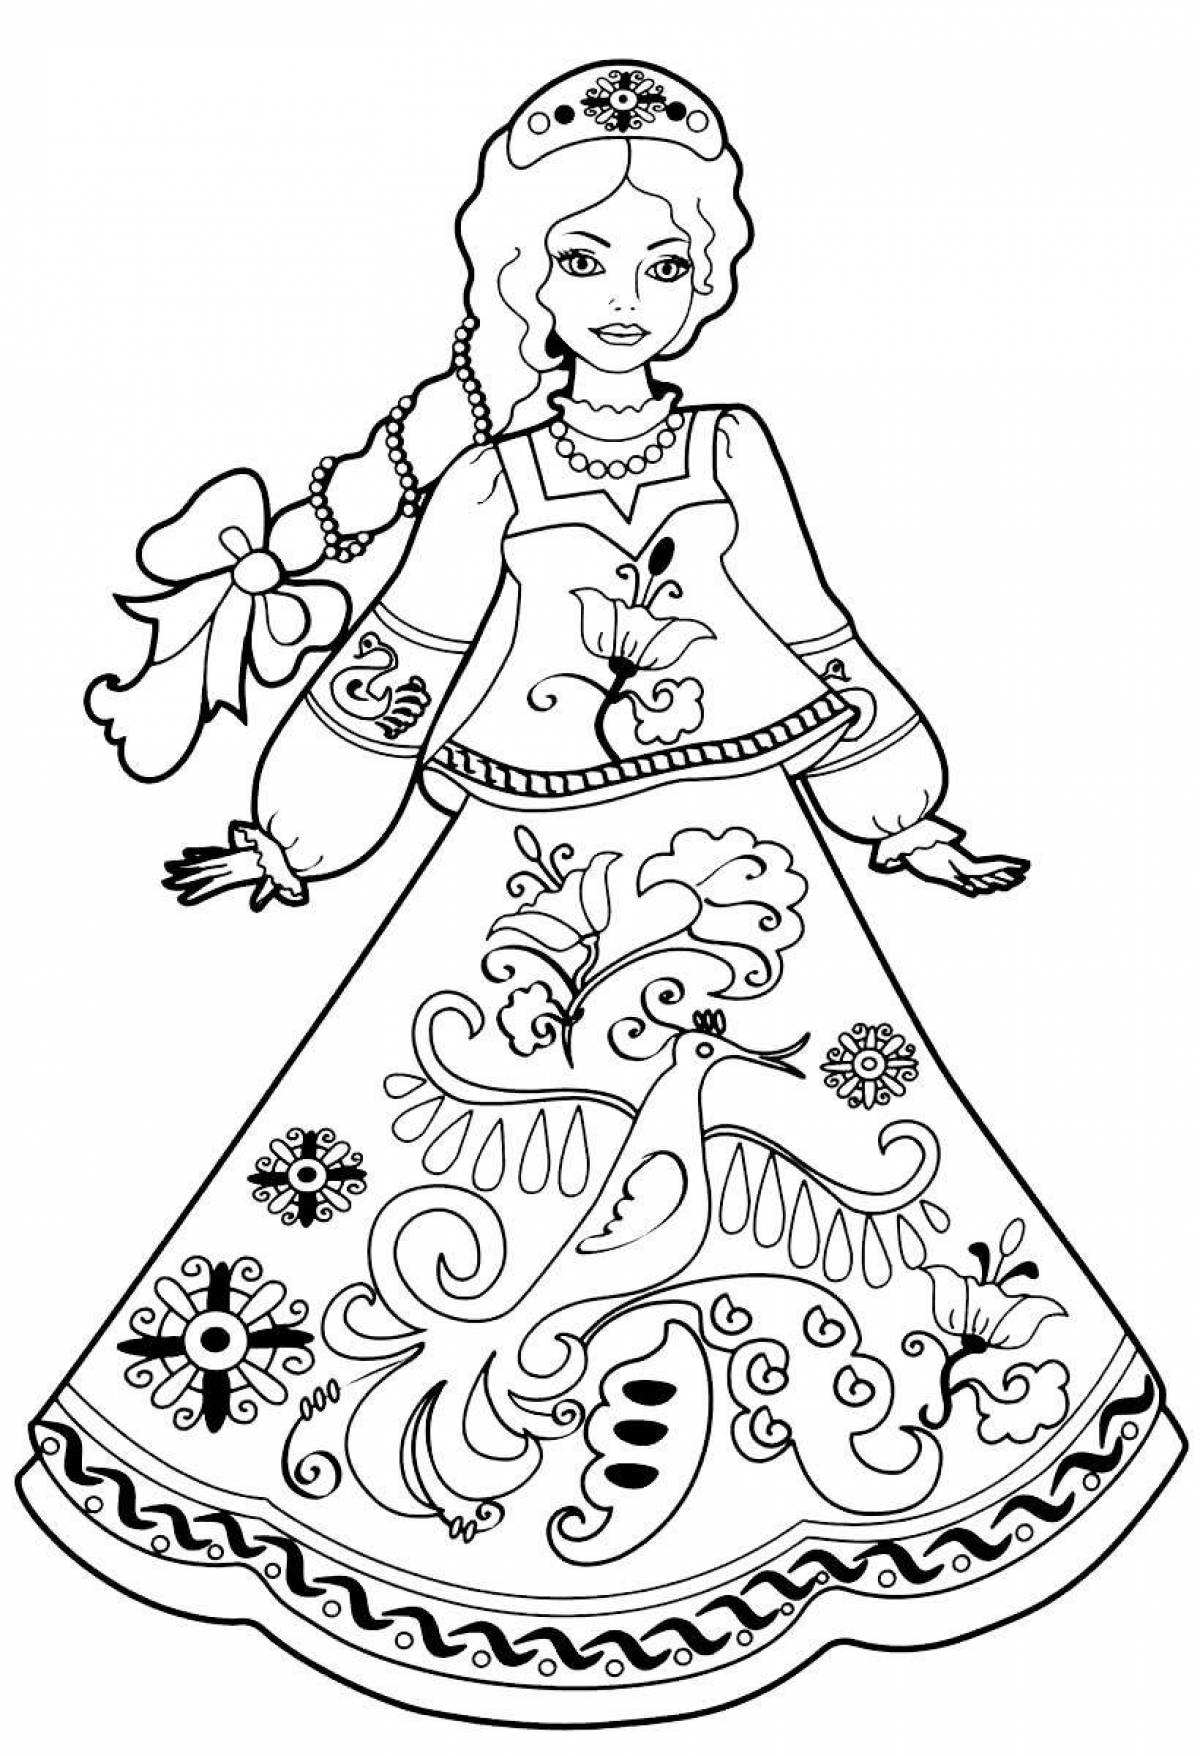 Colorful Russian girl coloring book